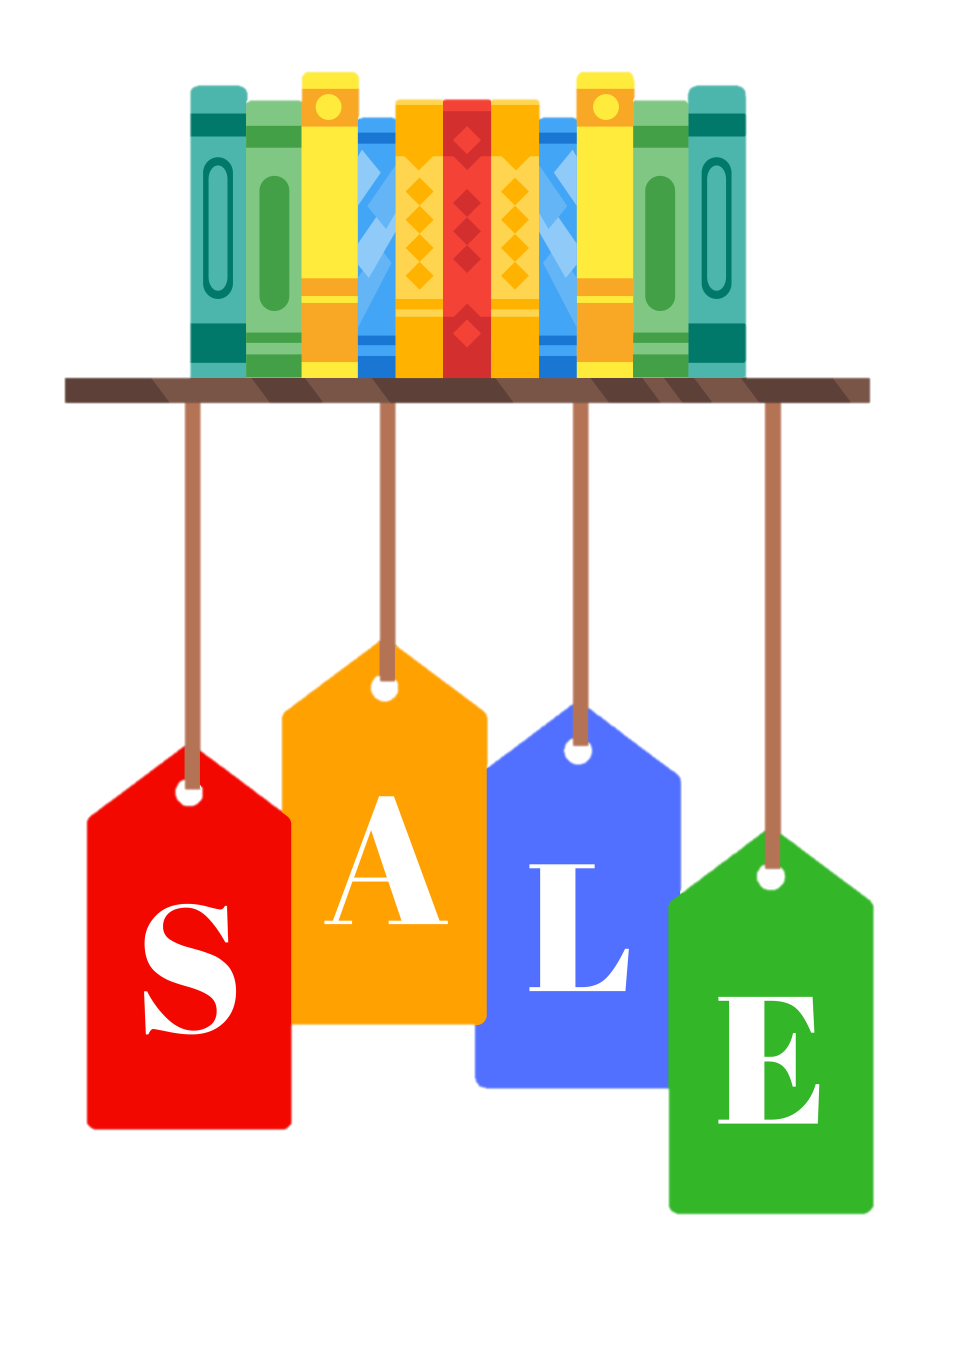 Illustration of a shelf with books on it with four tags hanging below it that spell out the word SALE.